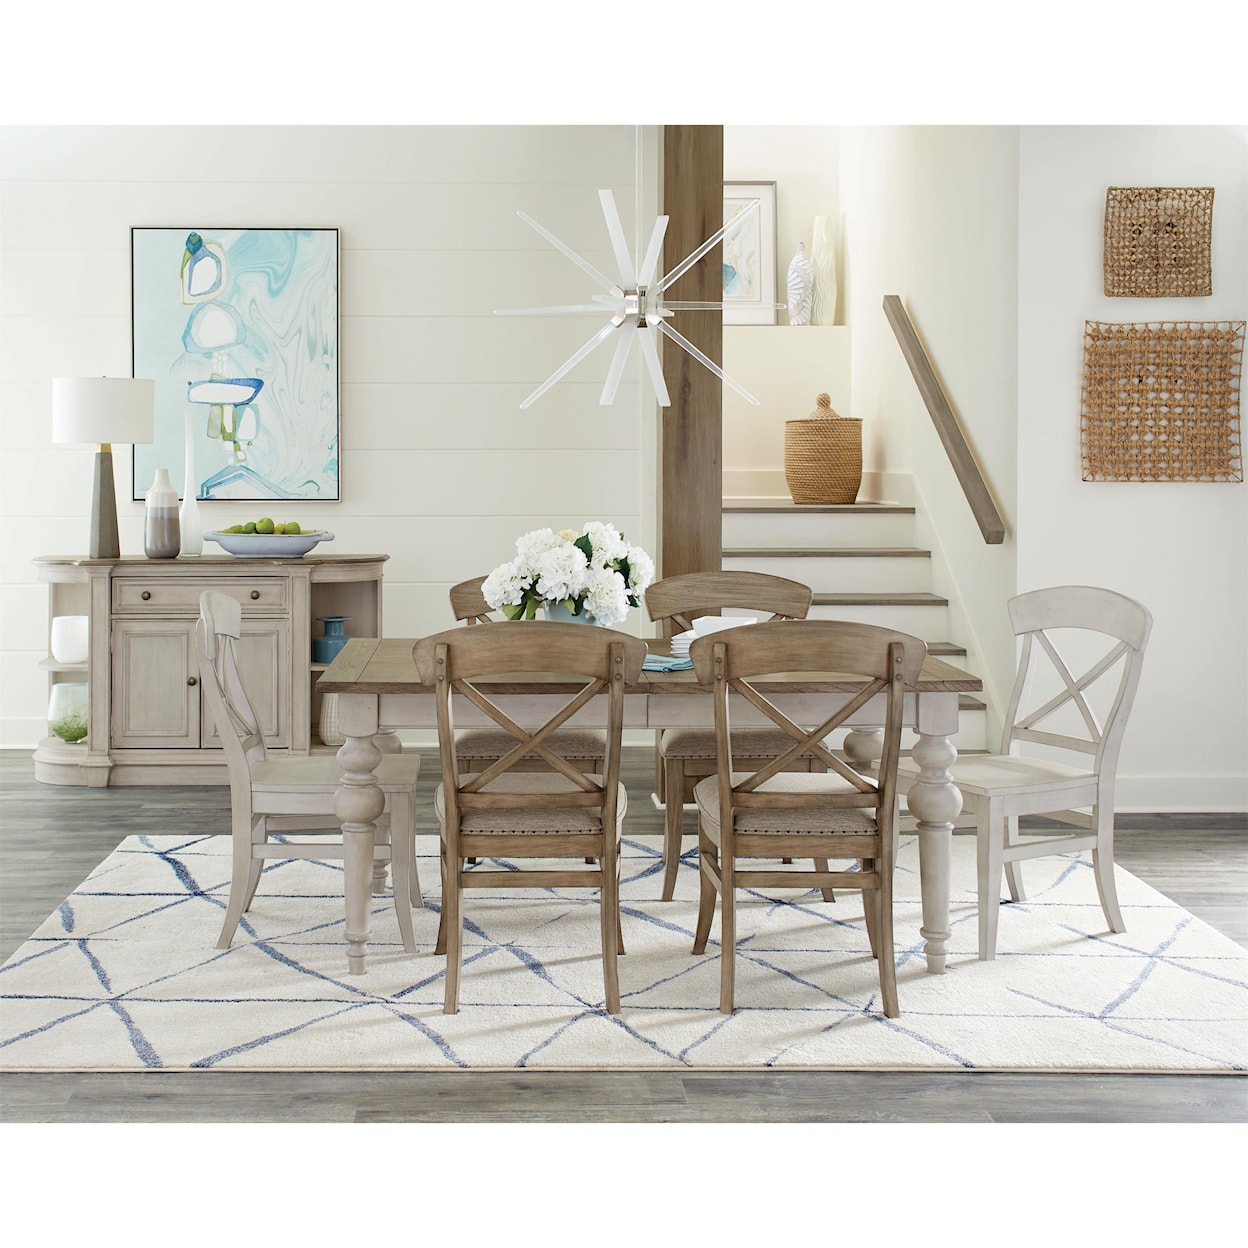 Riverside Furniture Mix and Match Mix and Match Side Chair